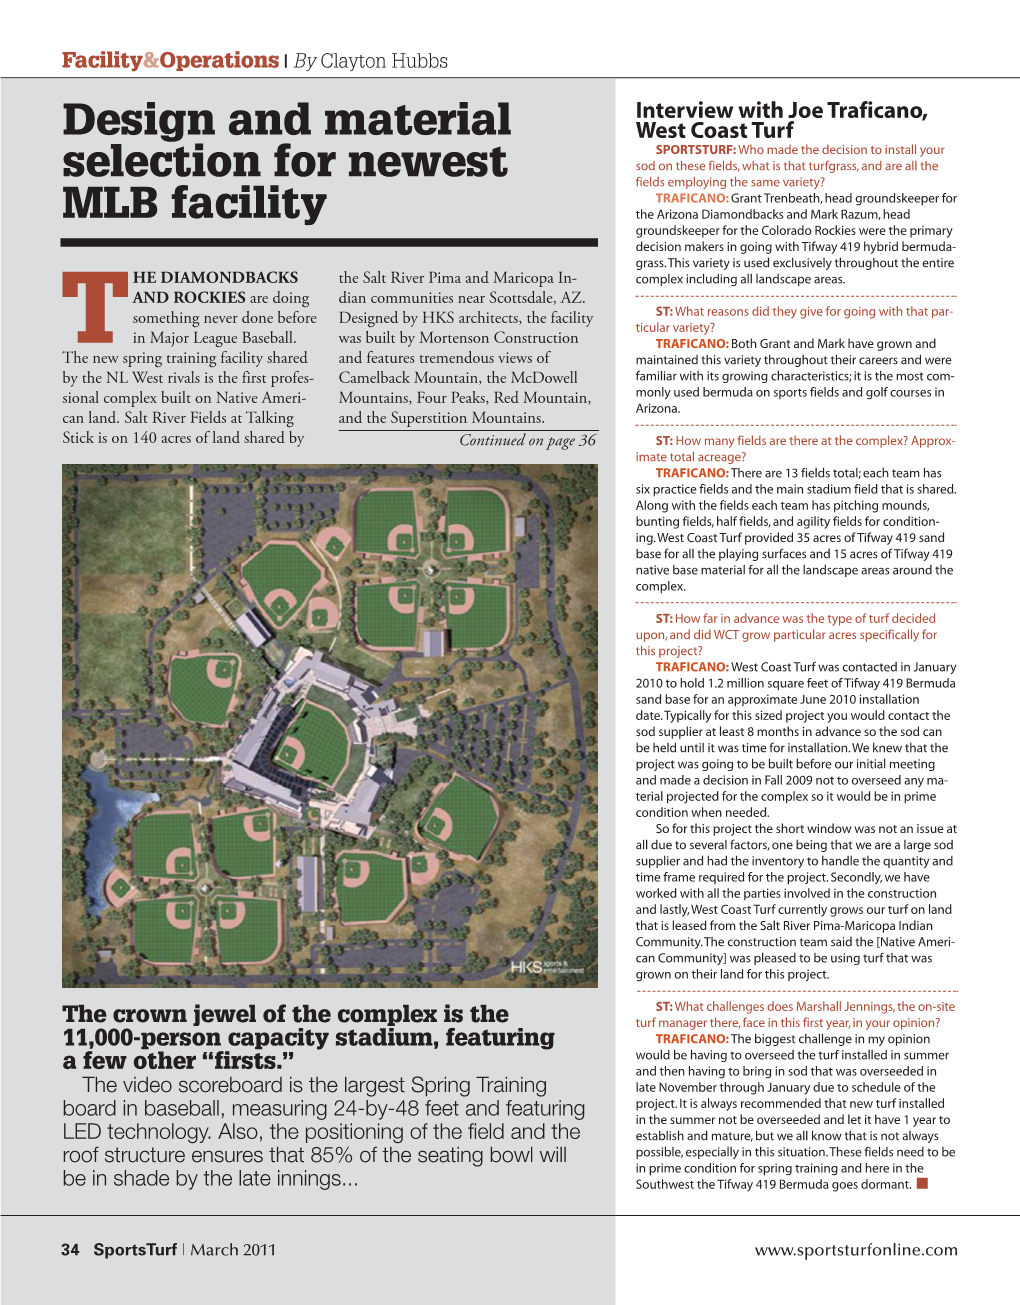 Design and Material Selection for Newest MLB Facility